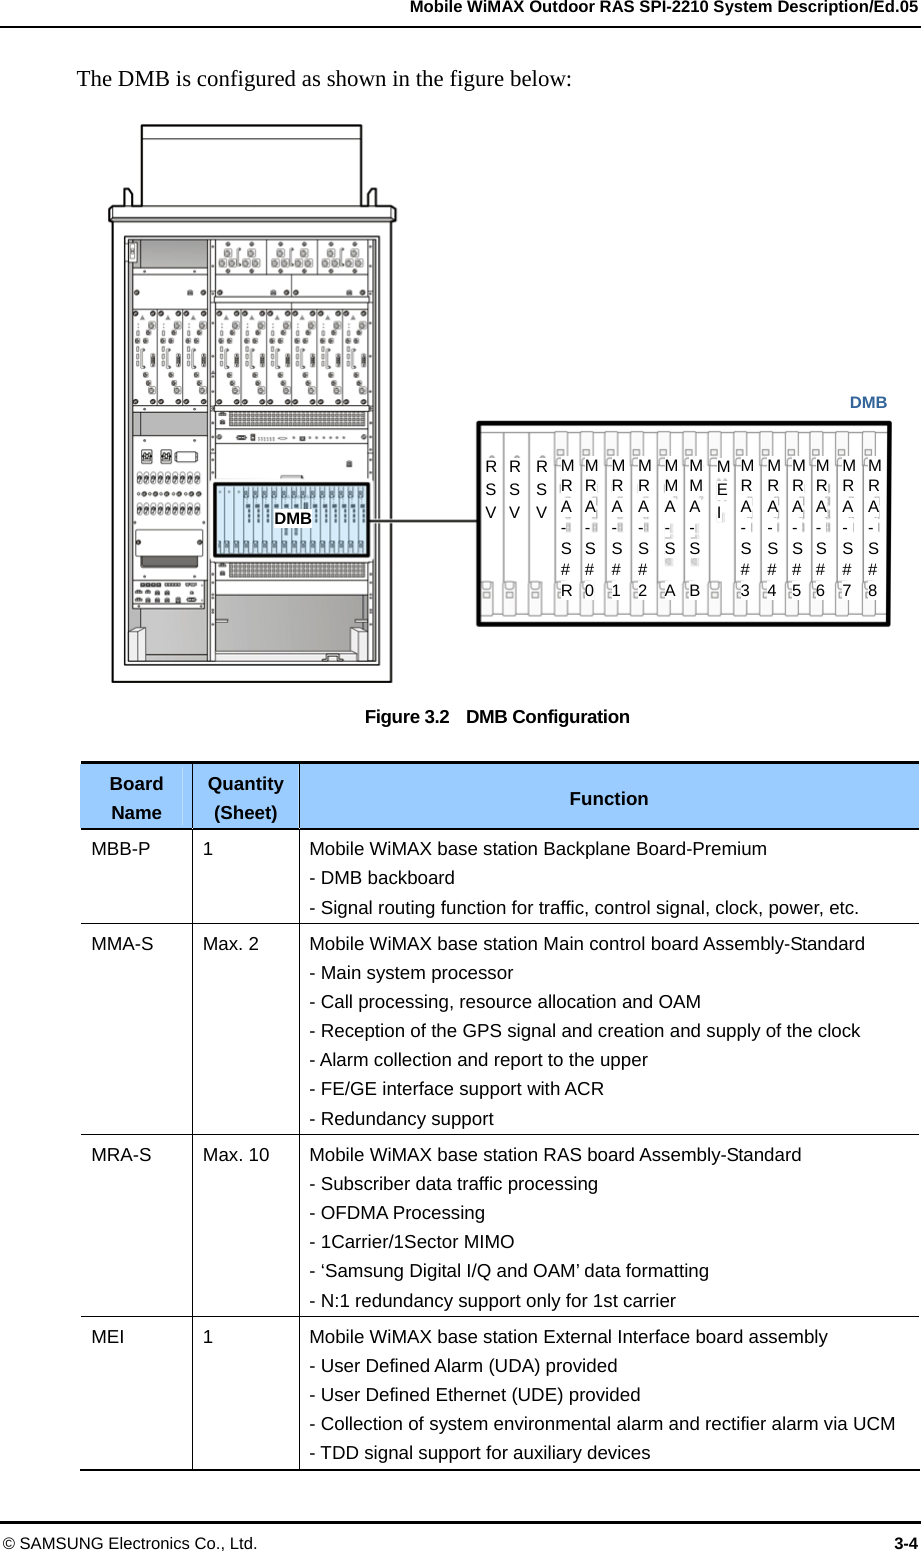   Mobile WiMAX Outdoor RAS SPI-2210 System Description/Ed.05 © SAMSUNG Electronics Co., Ltd.  3-4 The DMB is configured as shown in the figure below:  Figure 3.2    DMB Configuration  Board Name Quantity (Sheet) Function MBB-P  1  Mobile WiMAX base station Backplane Board-Premium - DMB backboard - Signal routing function for traffic, control signal, clock, power, etc. MMA-S  Max. 2  Mobile WiMAX base station Main control board Assembly-Standard   - Main system processor - Call processing, resource allocation and OAM - Reception of the GPS signal and creation and supply of the clock - Alarm collection and report to the upper - FE/GE interface support with ACR - Redundancy support MRA-S  Max. 10  Mobile WiMAX base station RAS board Assembly-Standard - Subscriber data traffic processing - OFDMA Processing - 1Carrier/1Sector MIMO - ‘Samsung Digital I/Q and OAM’ data formatting - N:1 redundancy support only for 1st carrier MEI  1  Mobile WiMAX base station External Interface board assembly - User Defined Alarm (UDA) provided - User Defined Ethernet (UDE) provided - Collection of system environmental alarm and rectifier alarm via UCM - TDD signal support for auxiliary devices RSVRSVRSVMRA- S#RMRA- S#0MRA- S#1MRA- S#2MMA- S AMEI M RA- S#3 M RA- S#4 M RA- S#5 M RA- S#6 M RA- S#7 MRA- S#8 DMBDMB MMA- S B